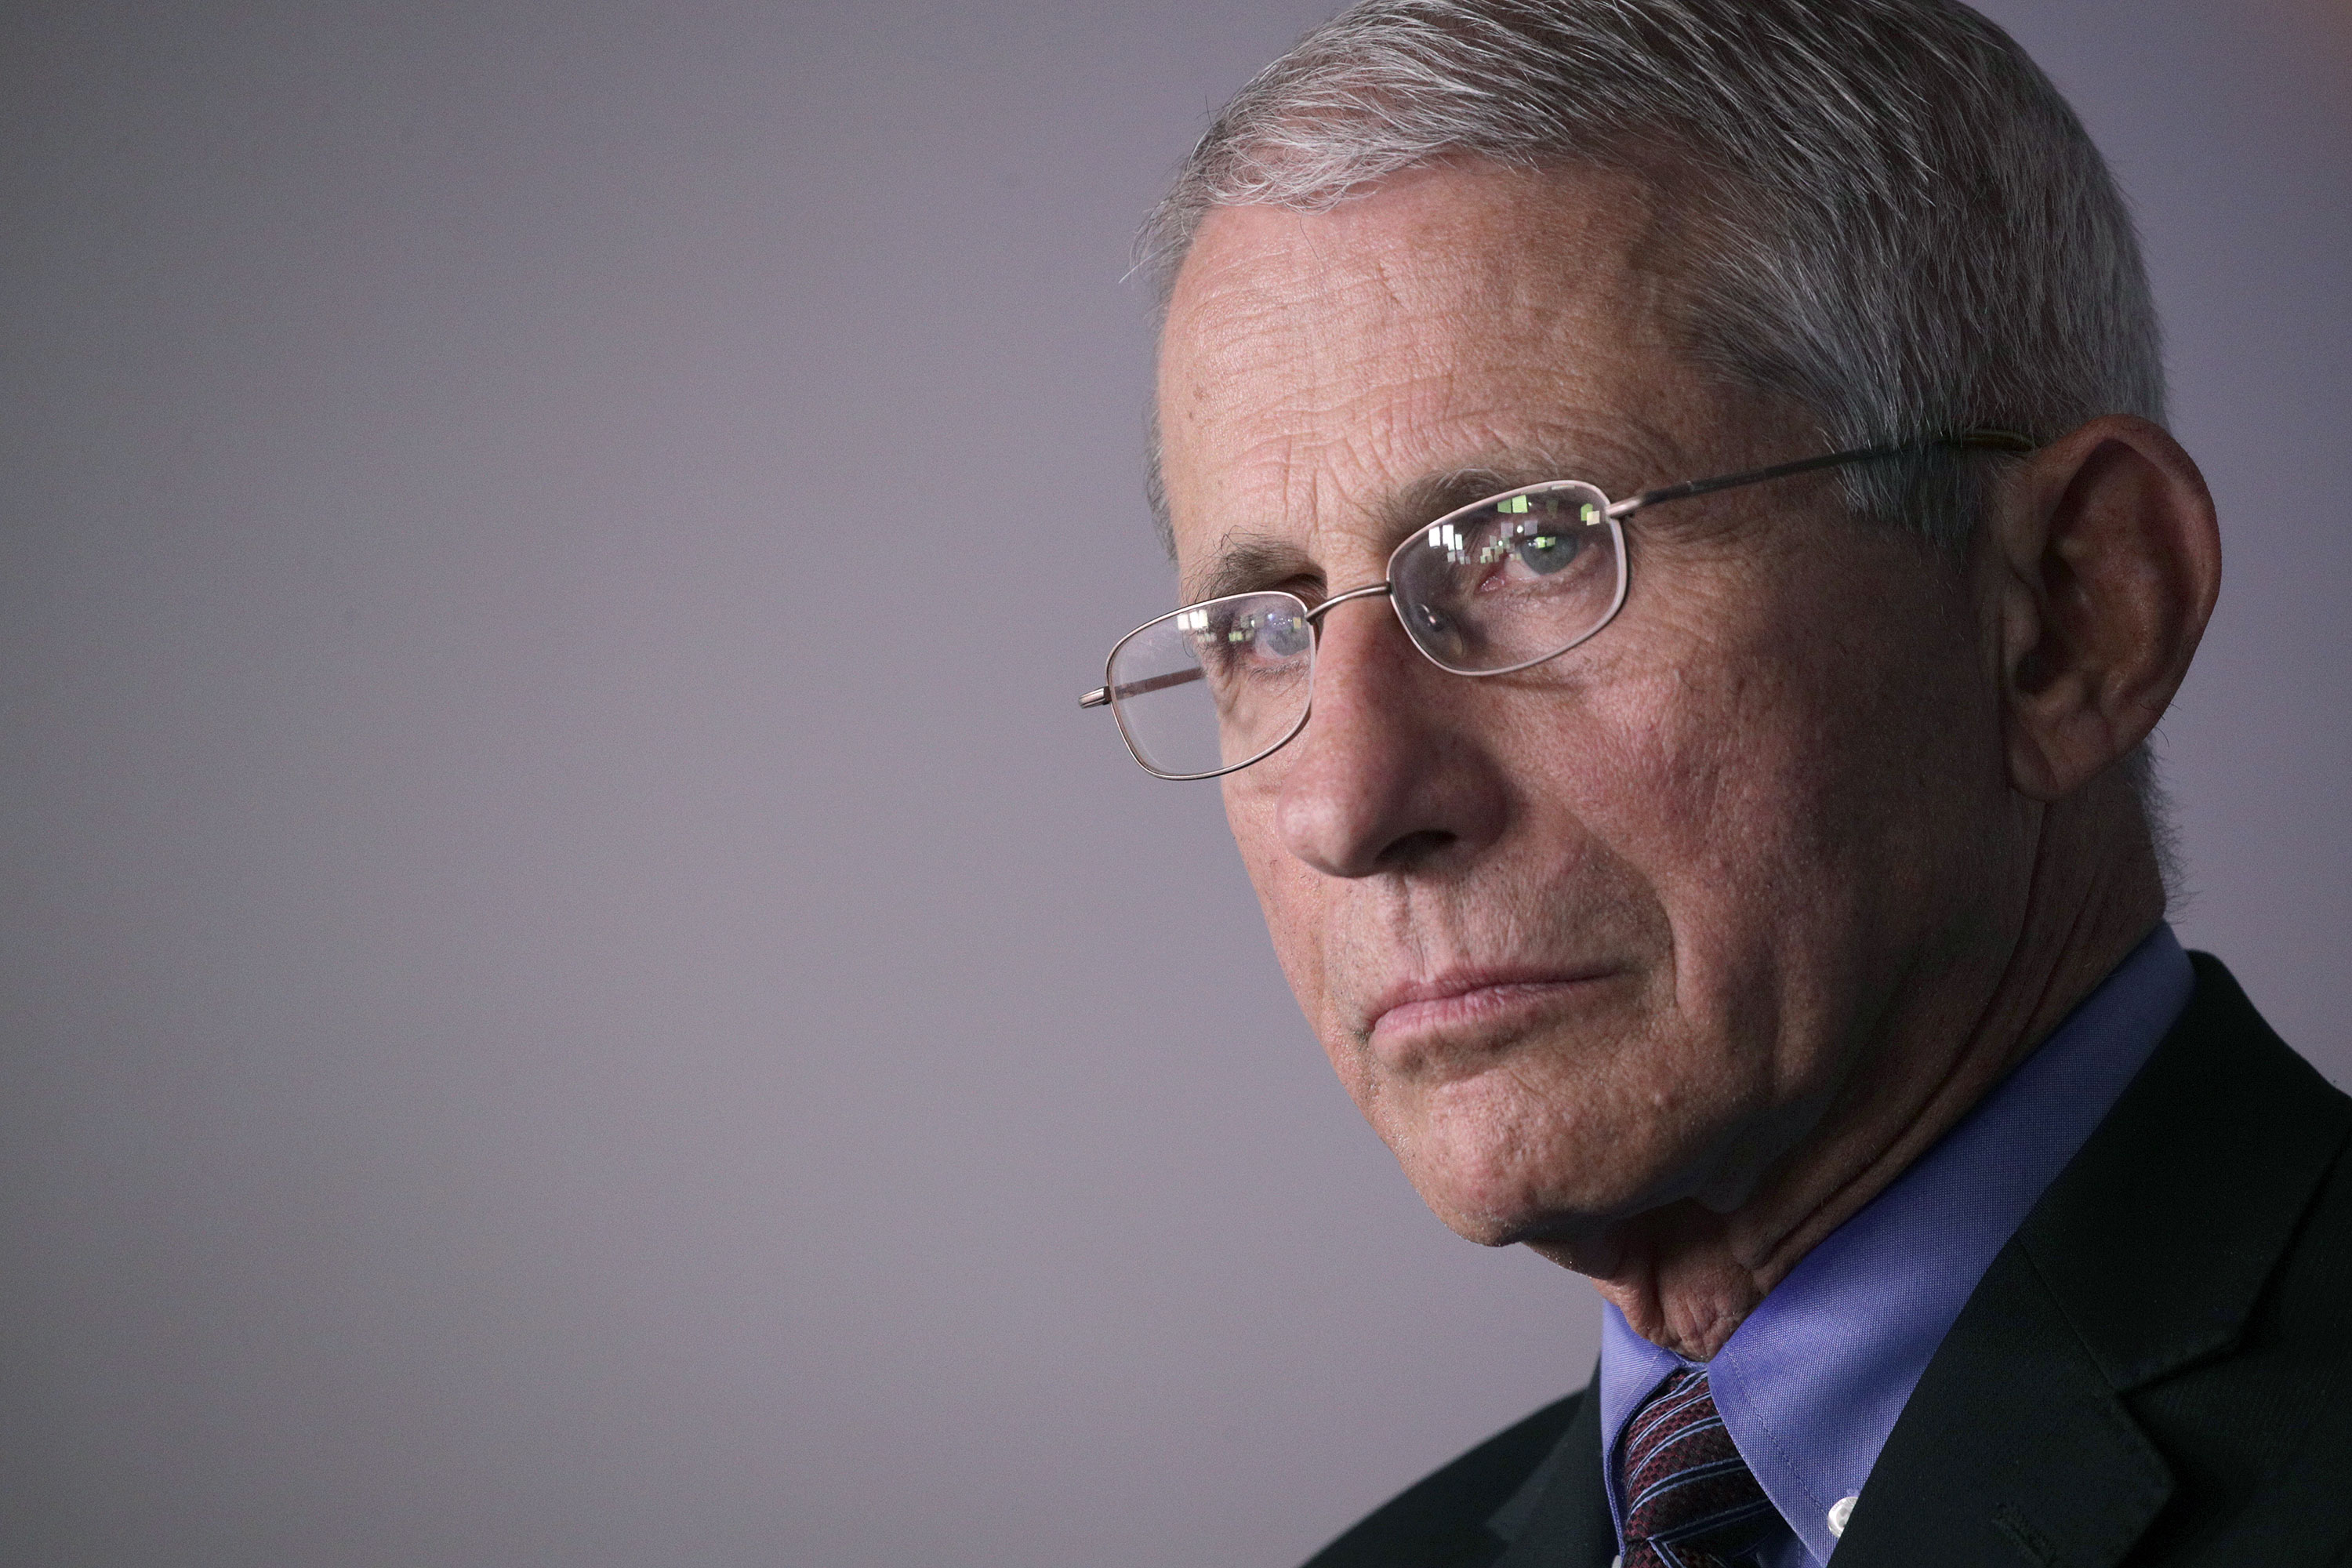 Dr. Anthony Fauci attends a coronavirus news briefing at the White House on April 9 in Washington.